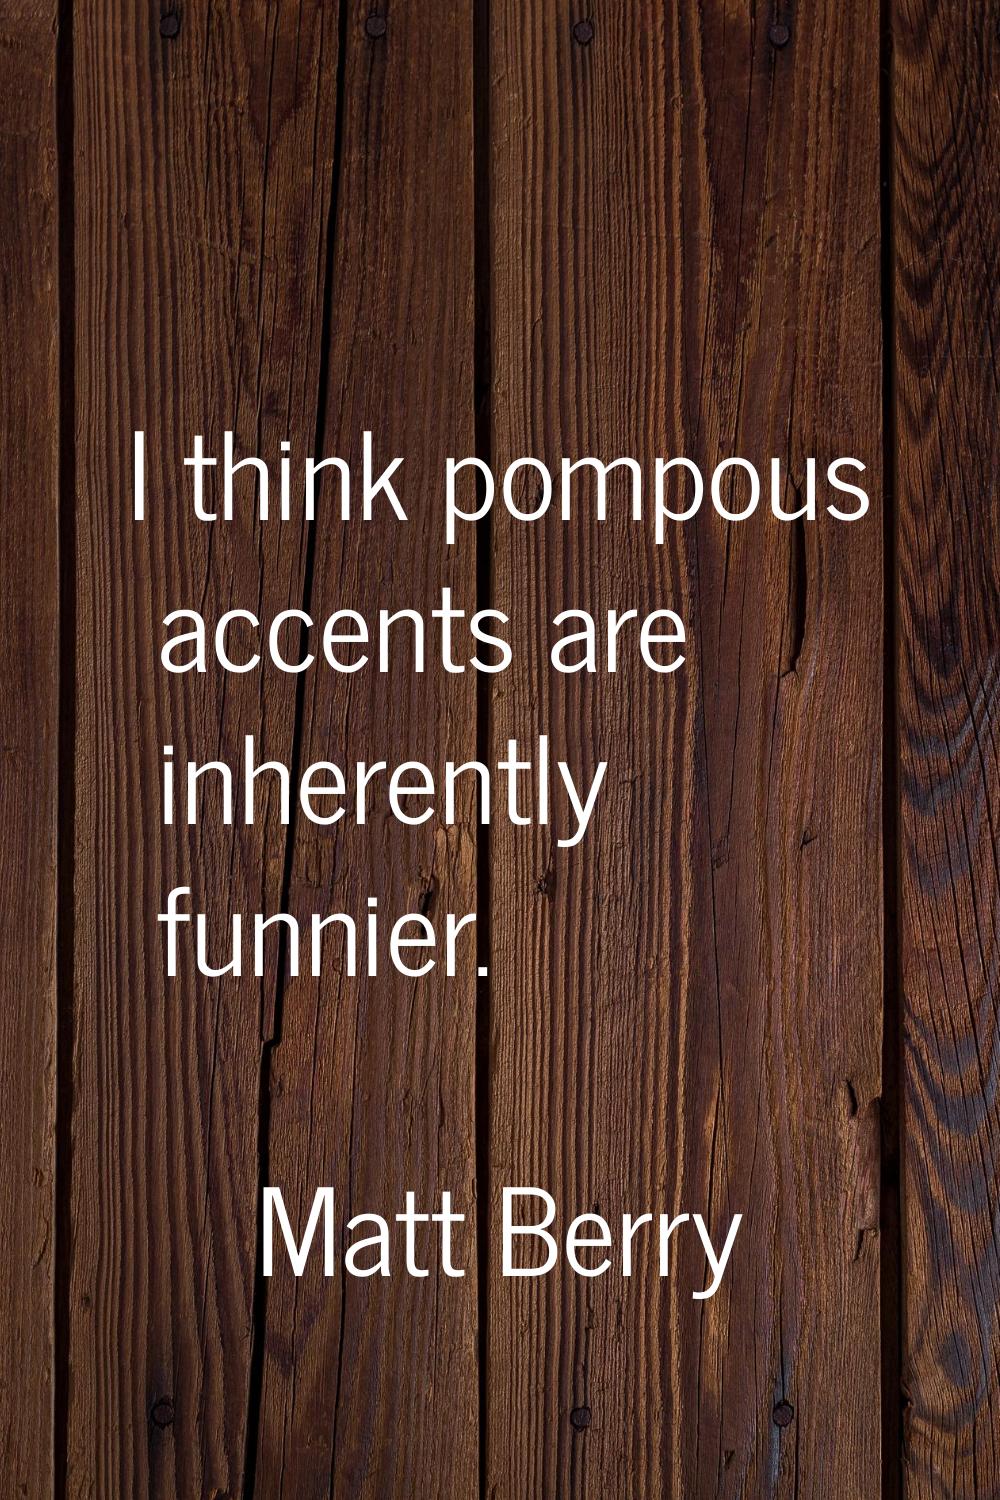 I think pompous accents are inherently funnier.